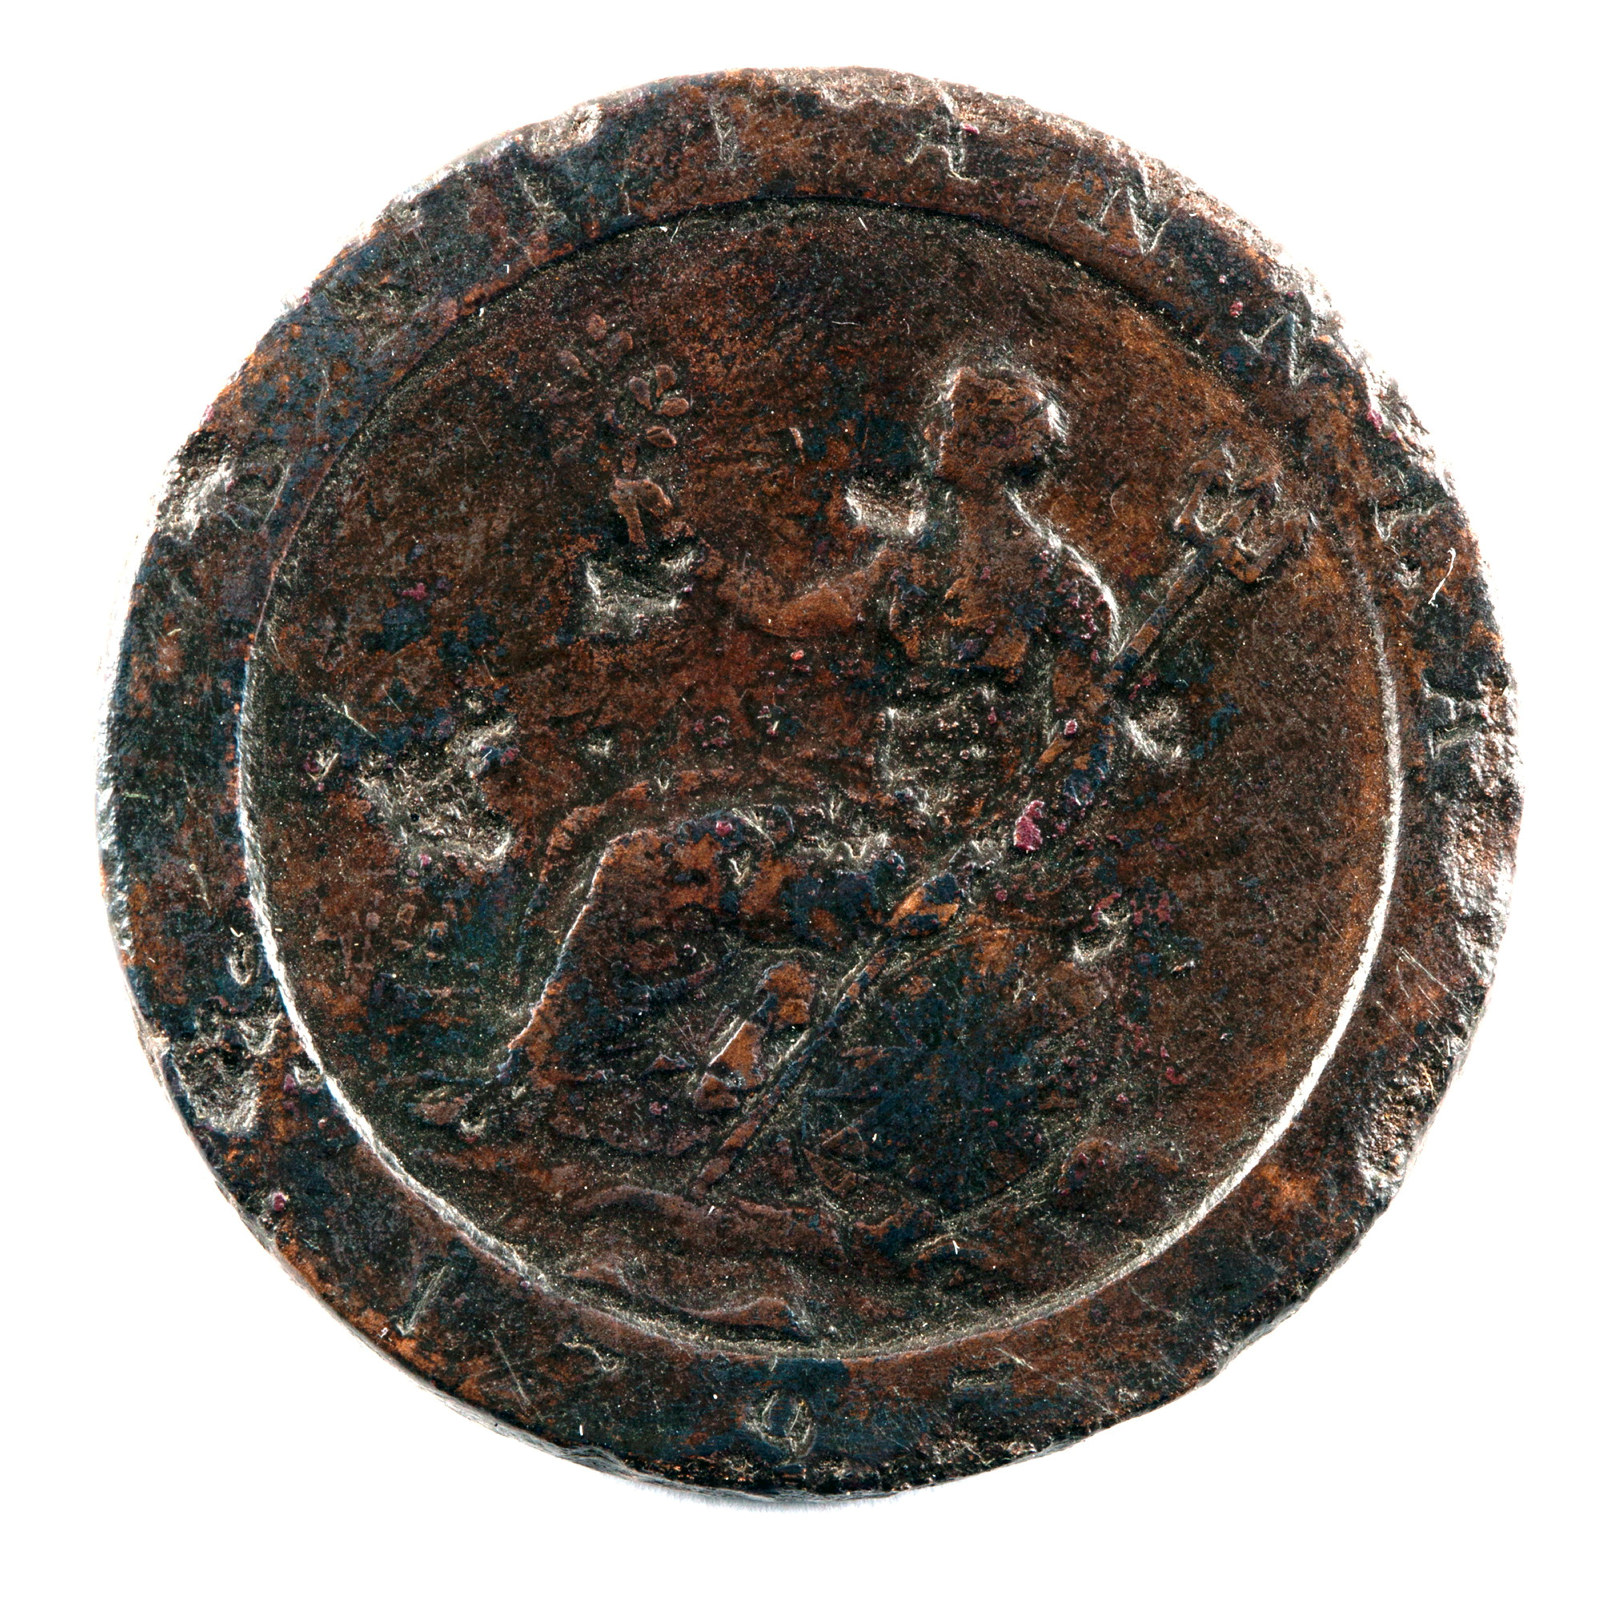 Coin - George III Cartwheel penny, 1797, (obverse), excavated from beneath the ground floor of Hyde Park Barracks